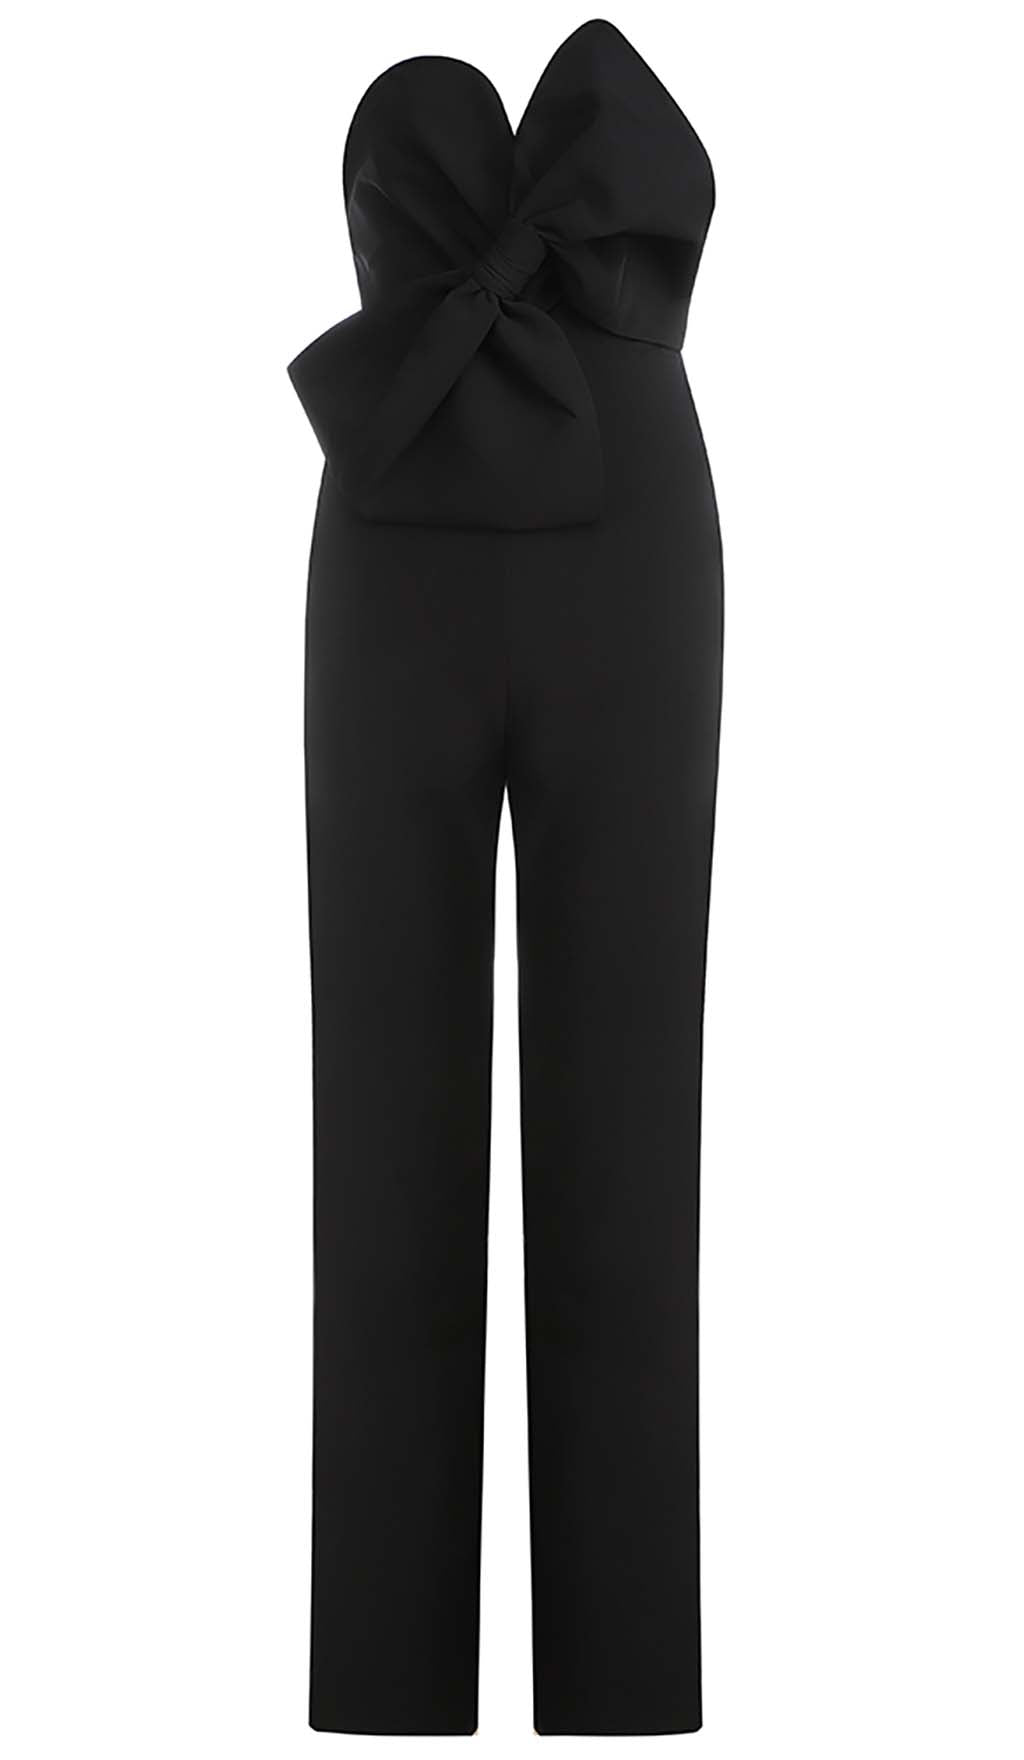 TWISTED BOW SILK FAILLE JUMPSUIT